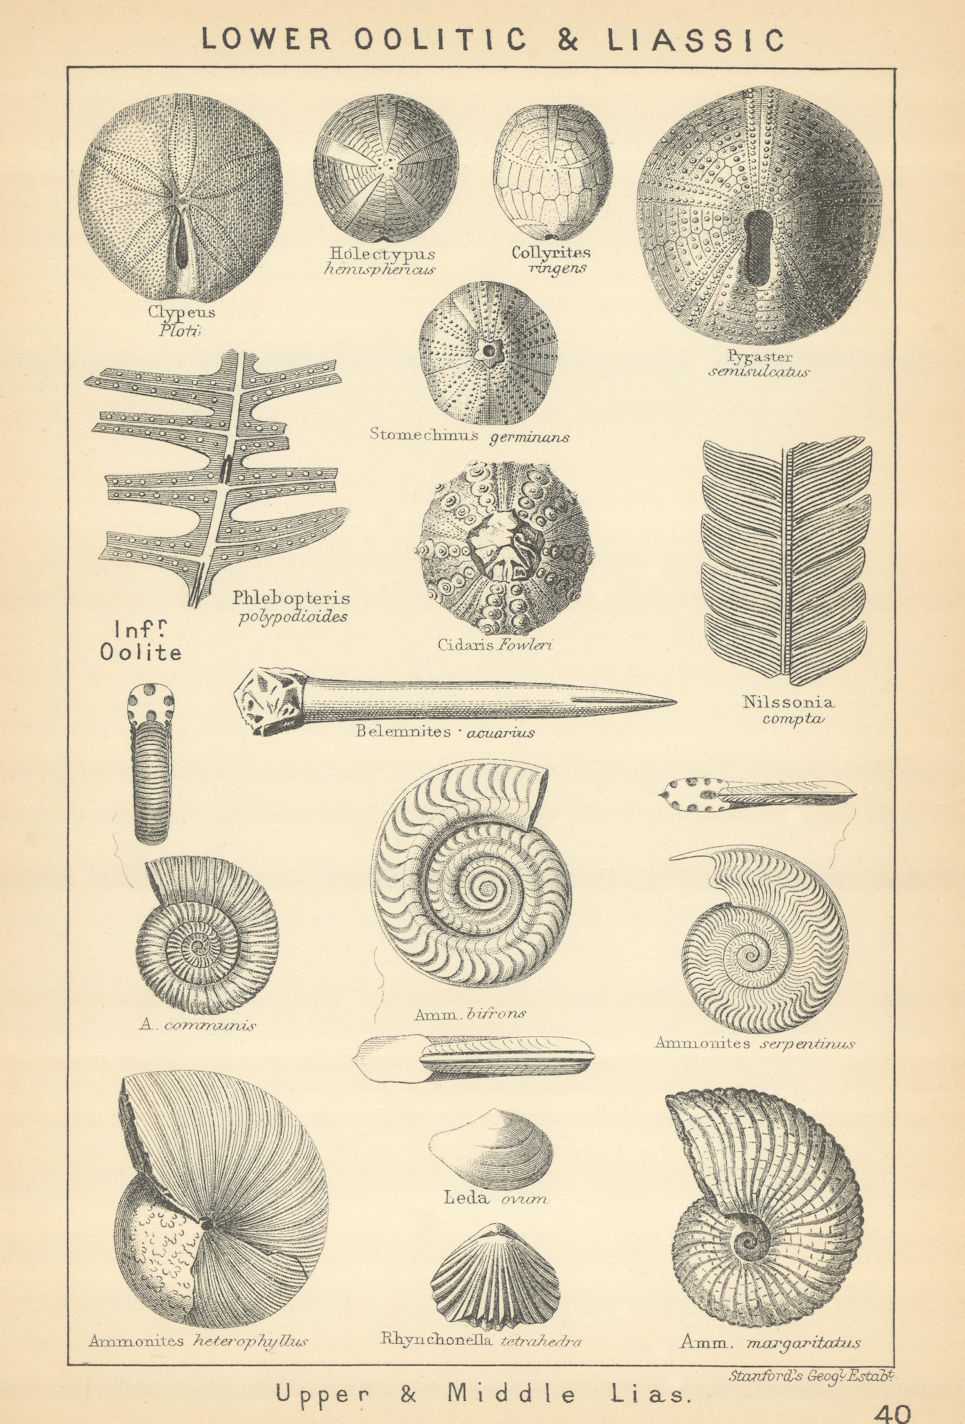 BRITISH FOSSILS. Lower Oolitic & Liassic - Upper and Middle Lias. STANFORD 1904